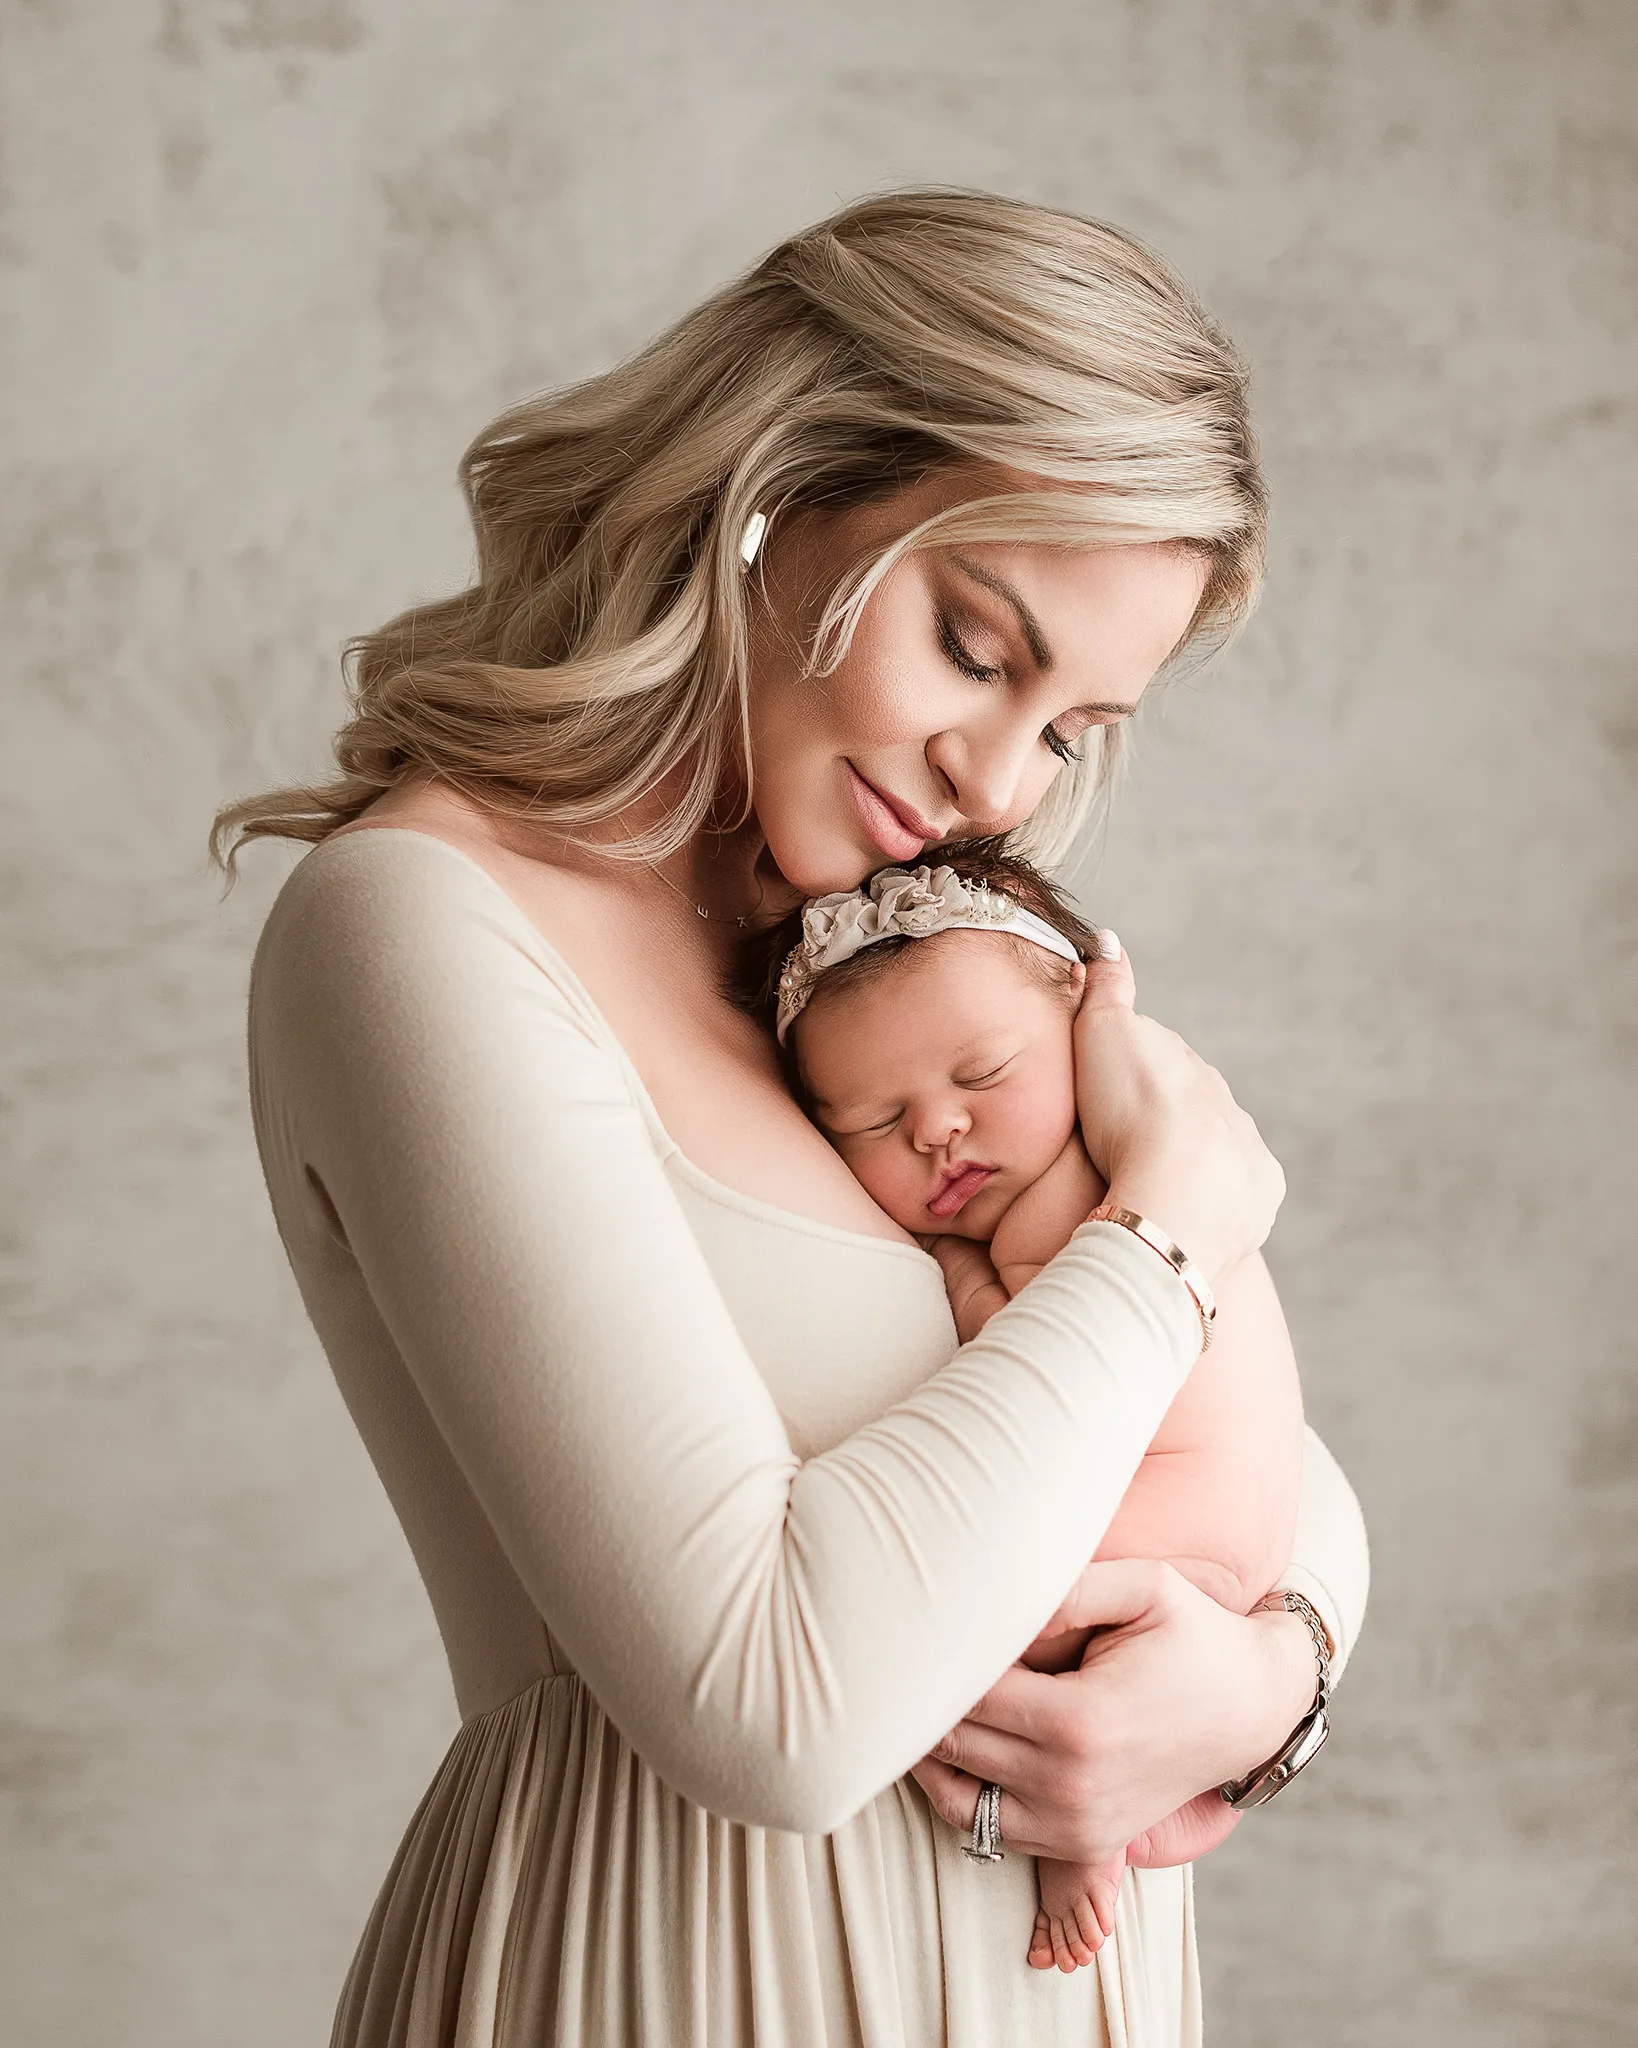 Mom posed with newborn baby girl during photo session, newborn girl photoshoot, omaha newborn photographer, family photography in nebraska, nebraska newborn photographer, luxury photoshoot nebraska